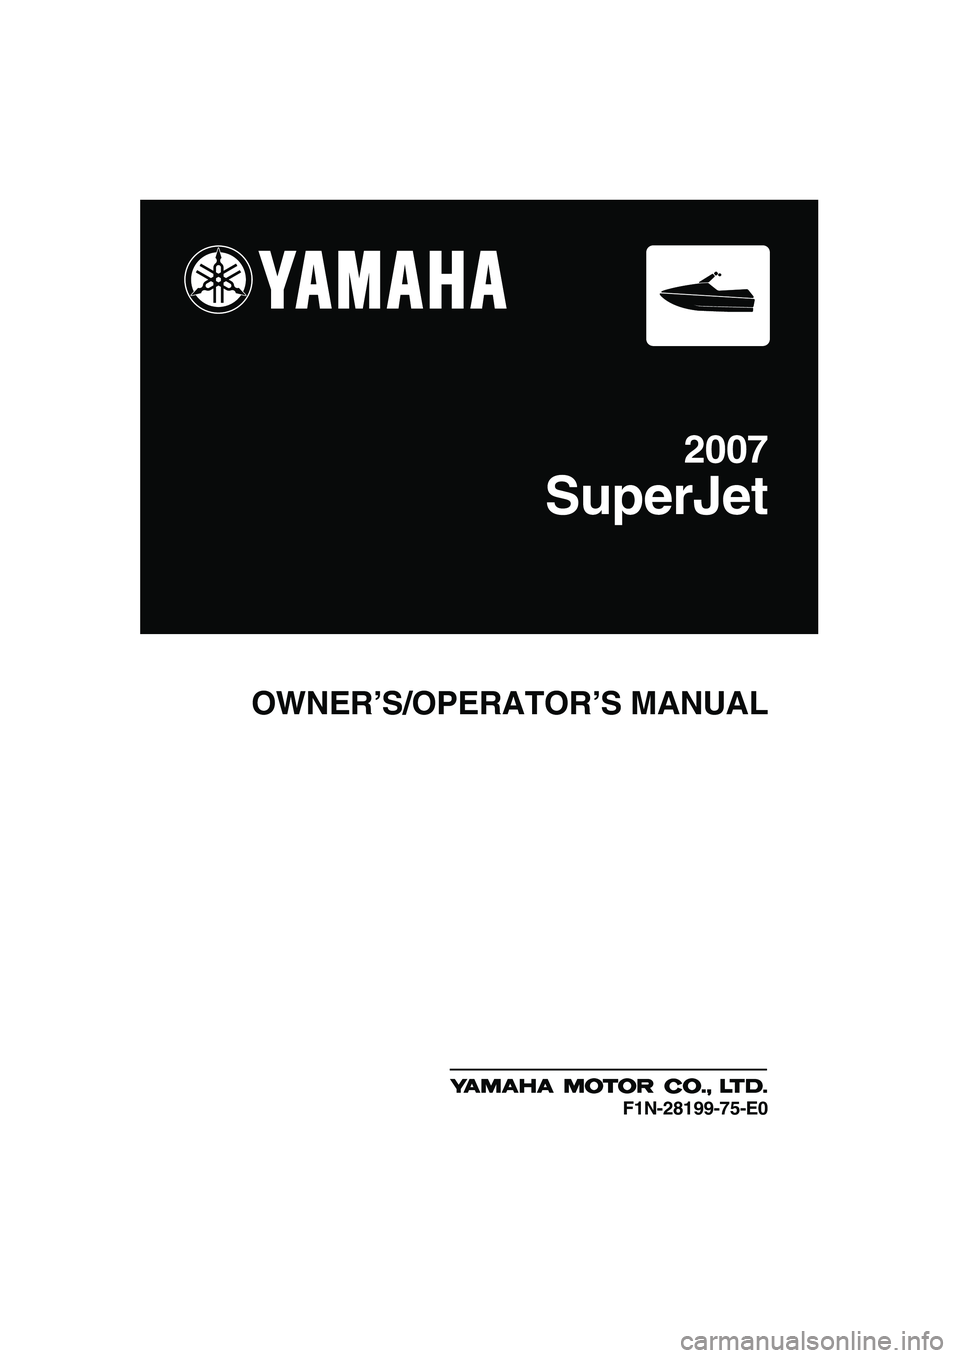 YAMAHA SUPERJET 2007  Owners Manual OWNER’S/OPERATOR’S MANUAL
2007
SuperJet
F1N-28199-75-E0
UF1N75E0.book  Page 1  Tuesday, May 16, 2006  9:53 AM 